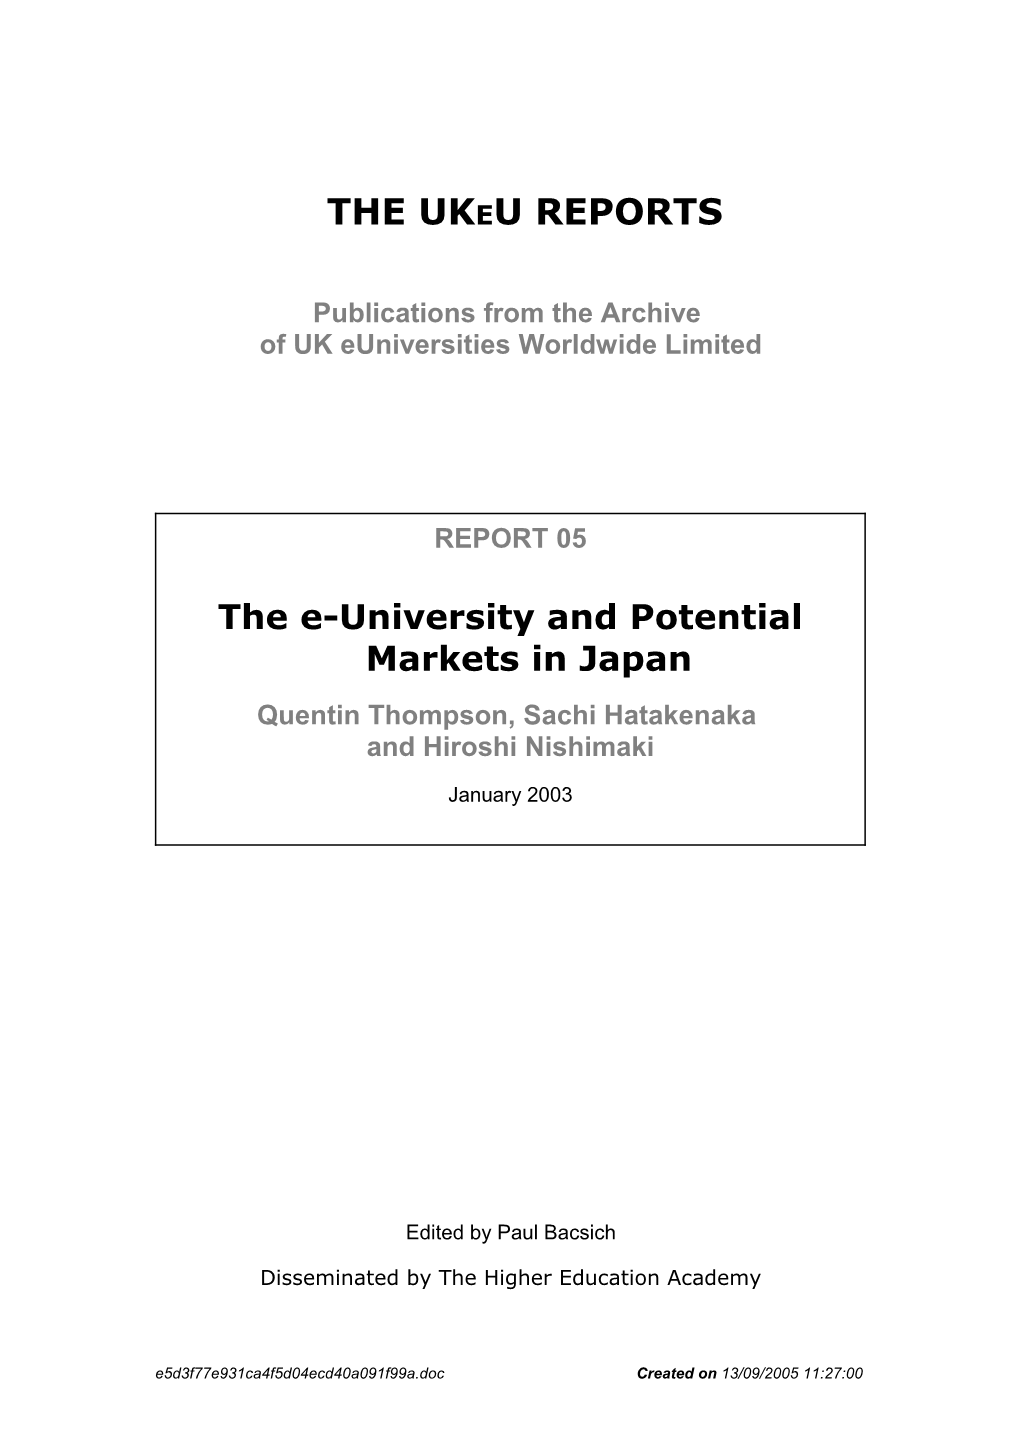 The E-University and Potential Markets in Japan